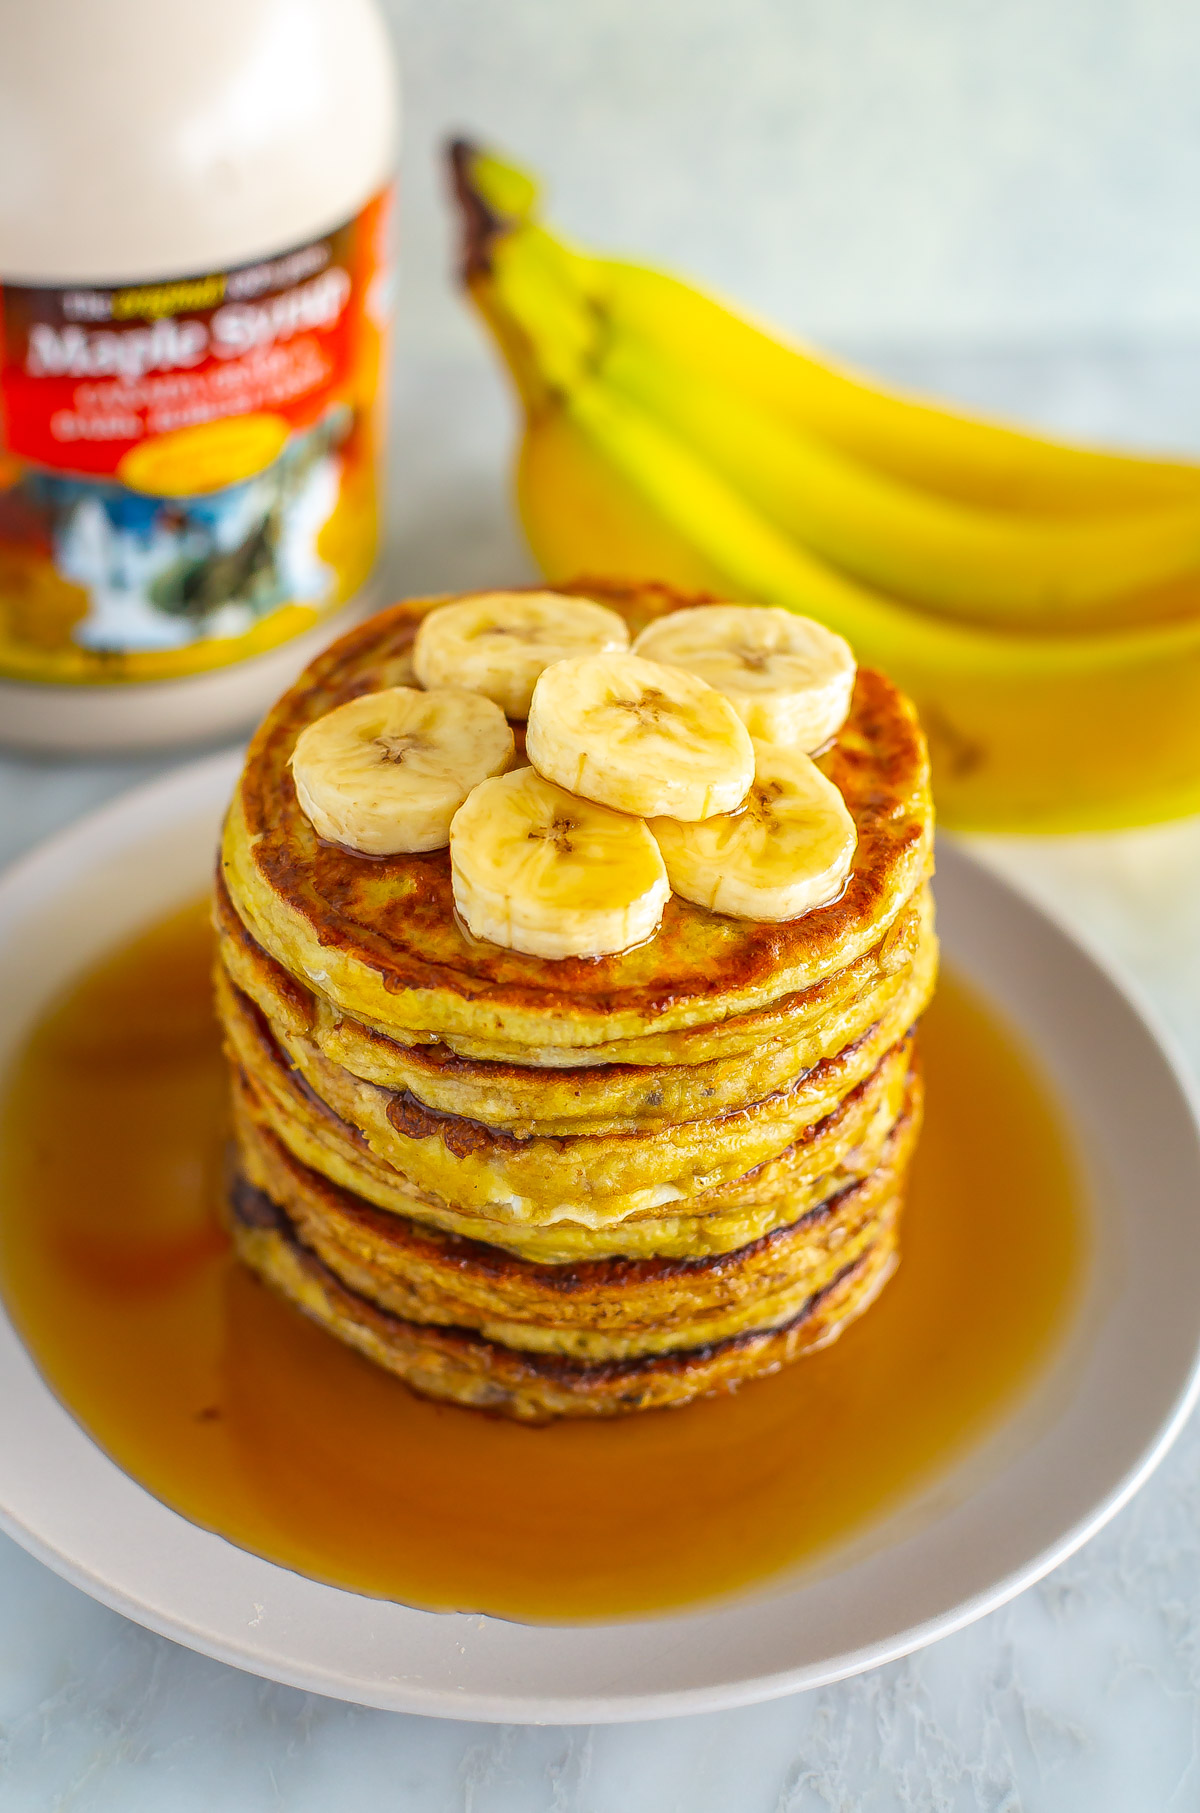 A close-up of banana egg pancakes with maple syrup drizzled over top.